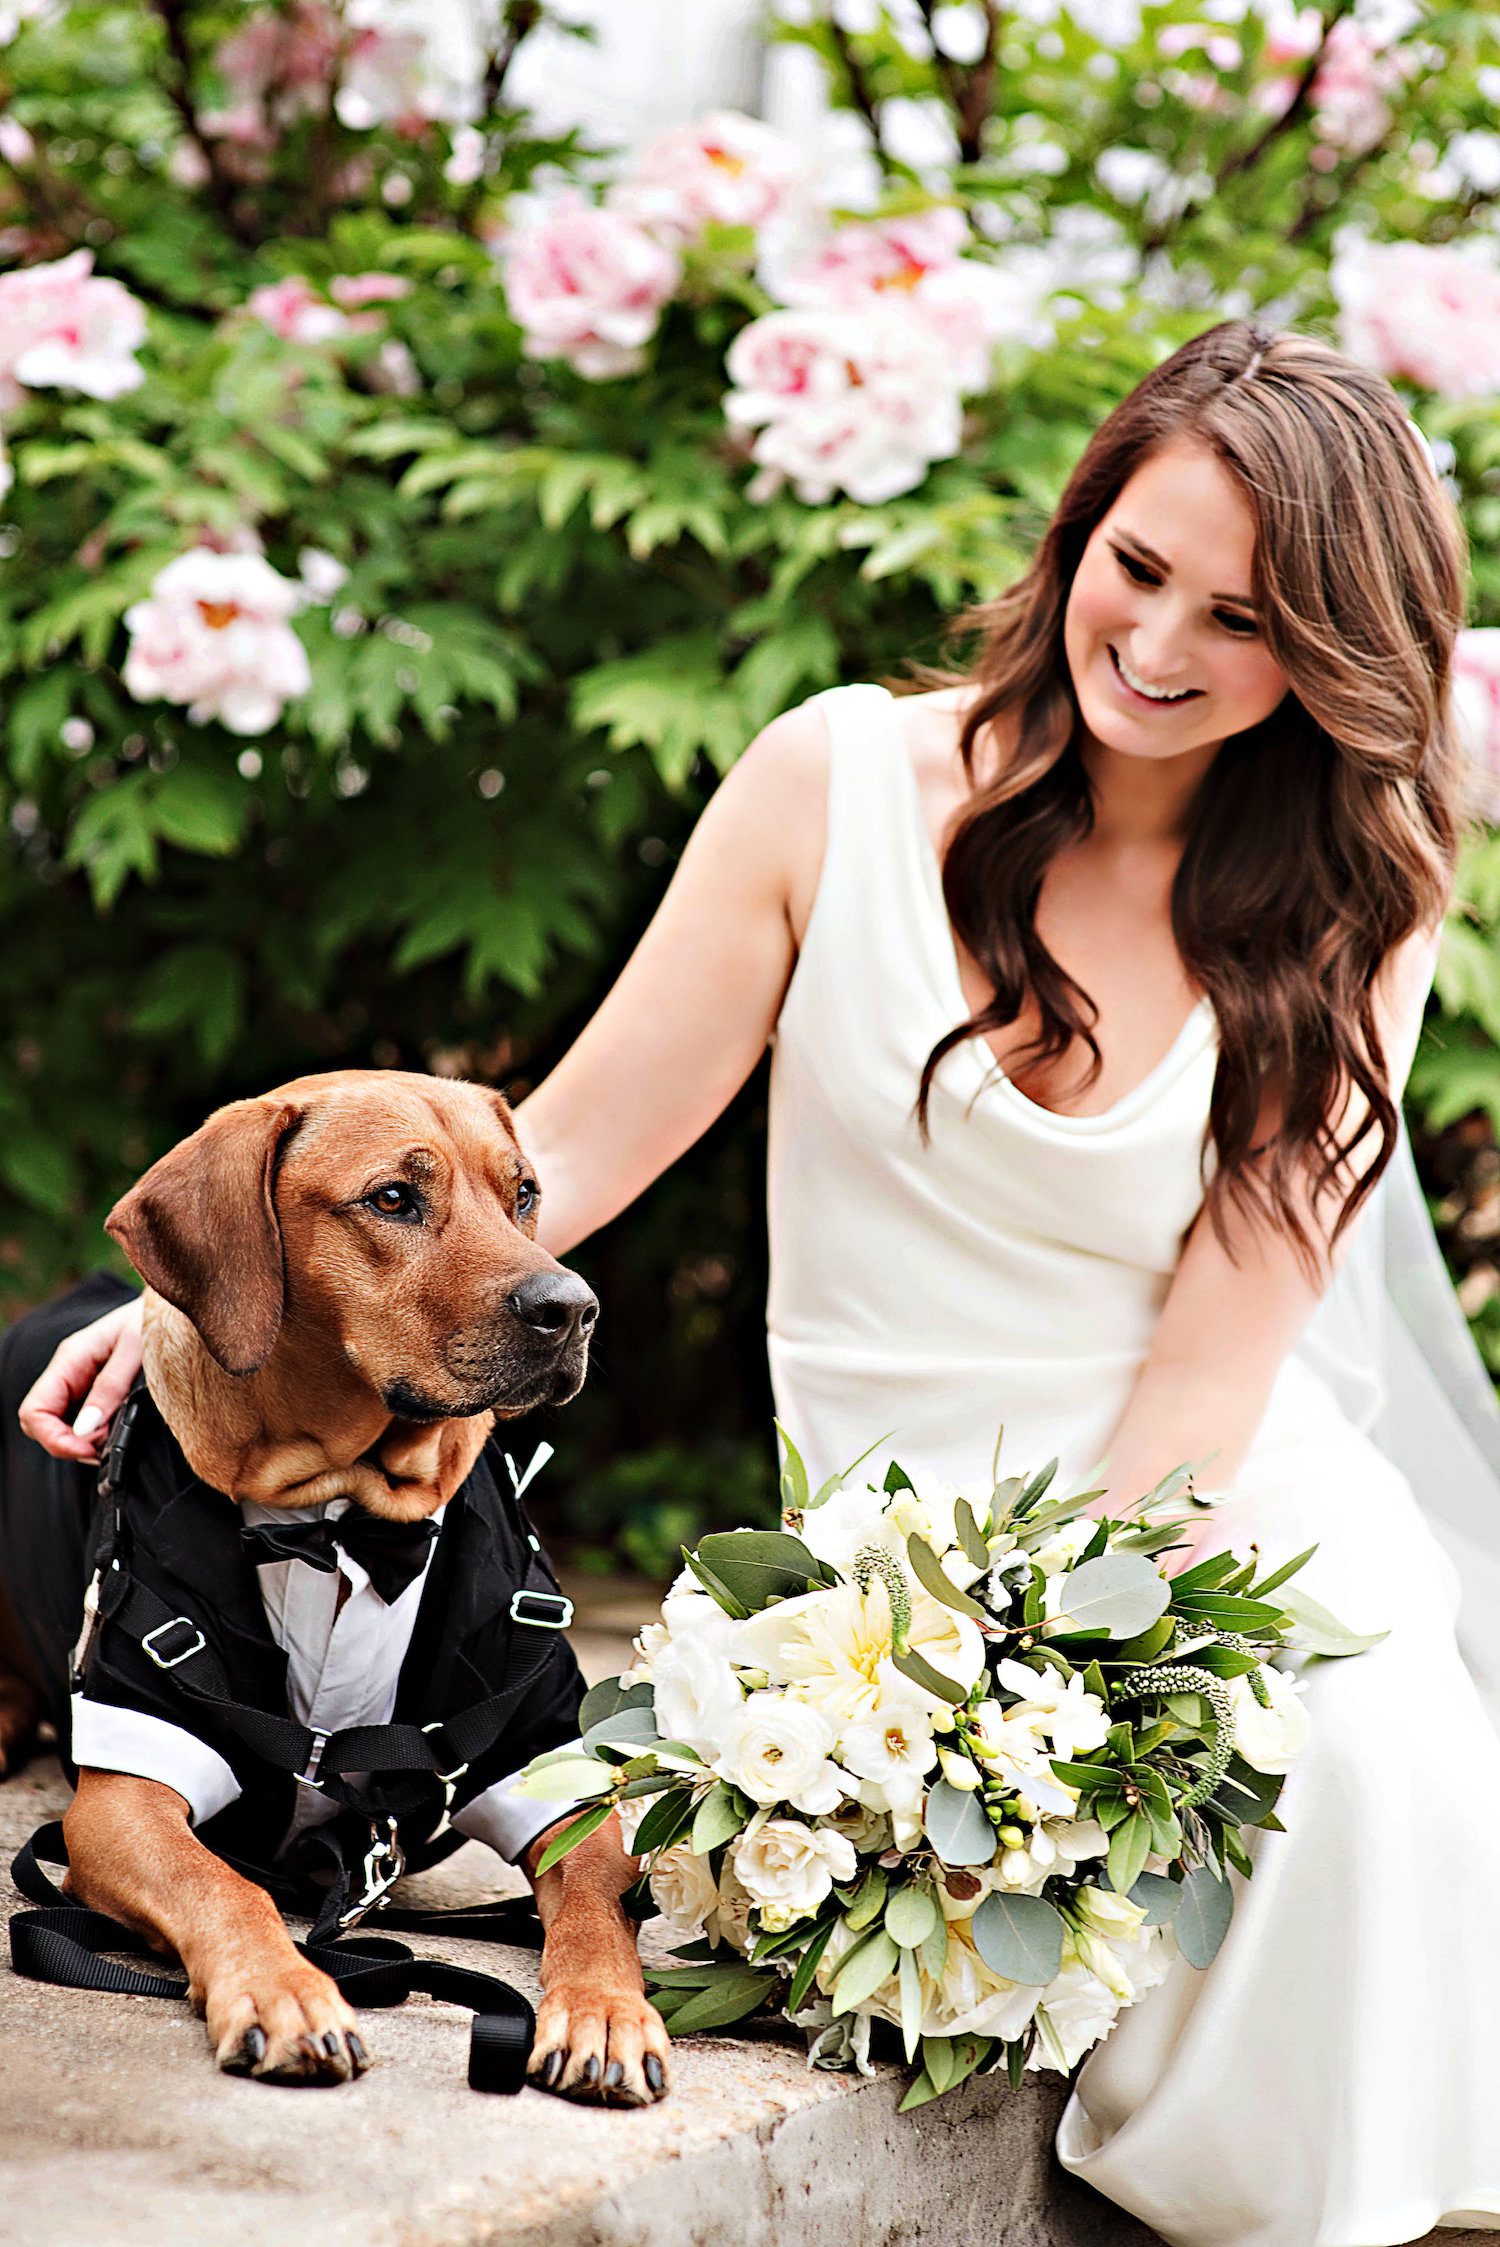 Kayla Plochan and her dog. Photographed by the Photography Smiths.